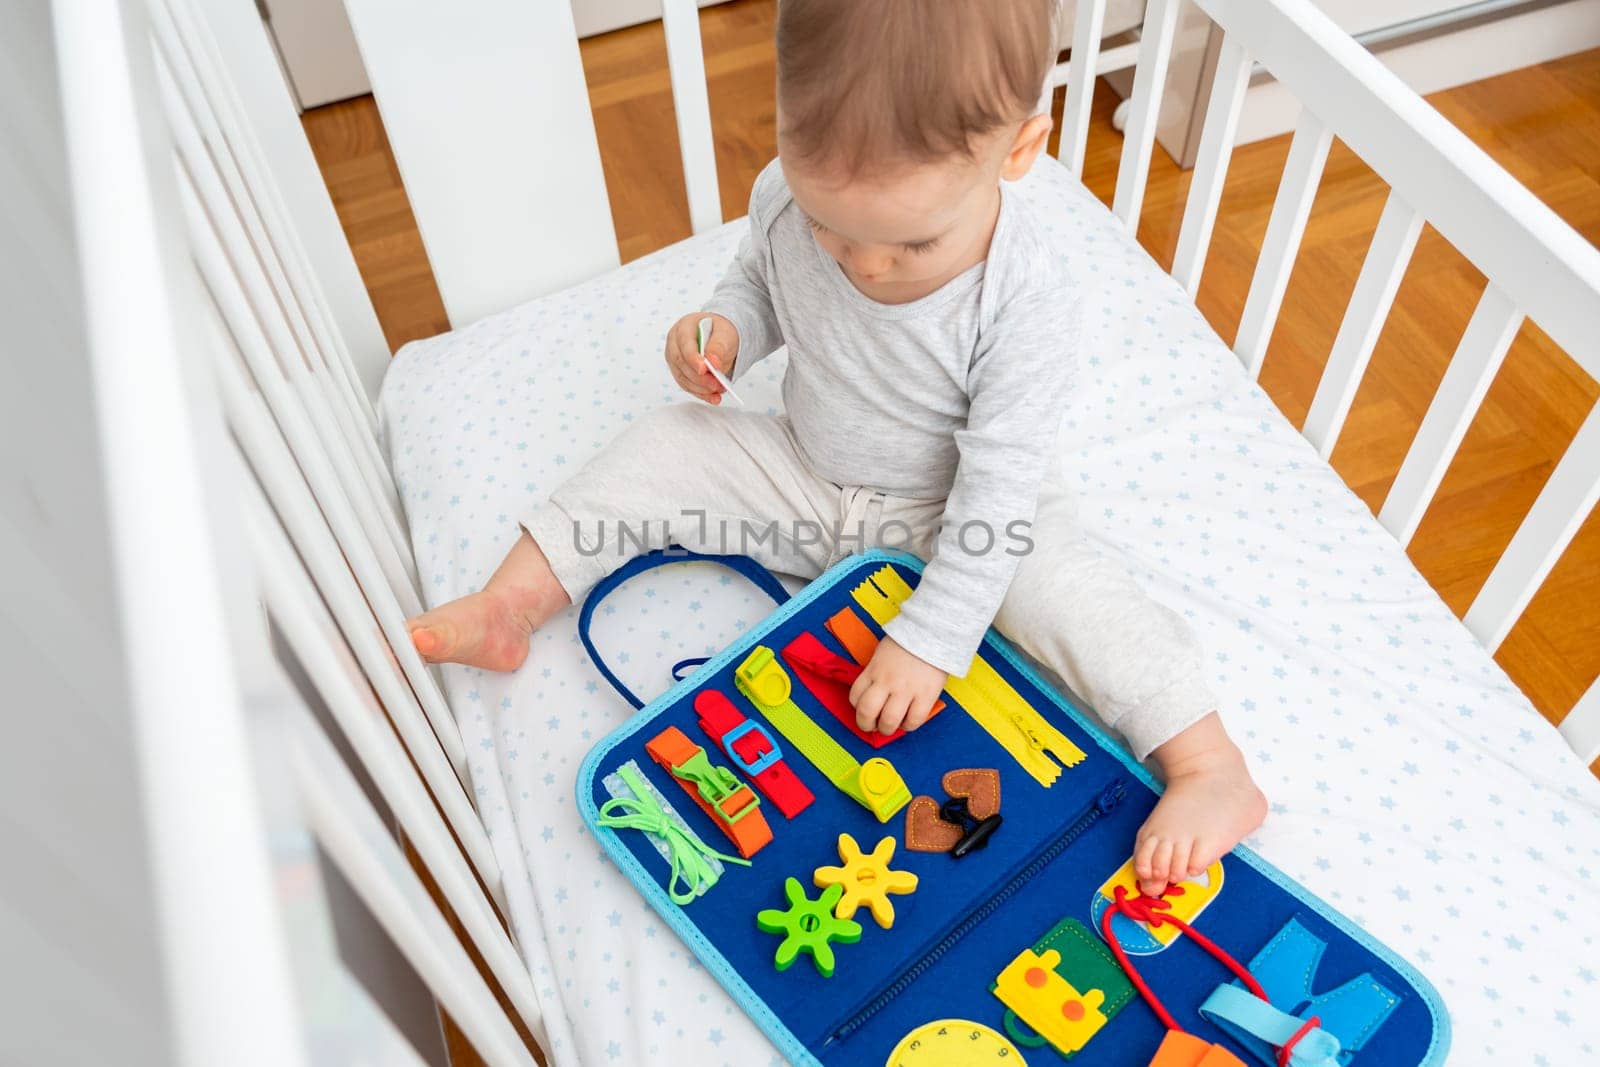 Baby girl playing with montessori busy book sitting in a crib, concept of early education by Mariakray